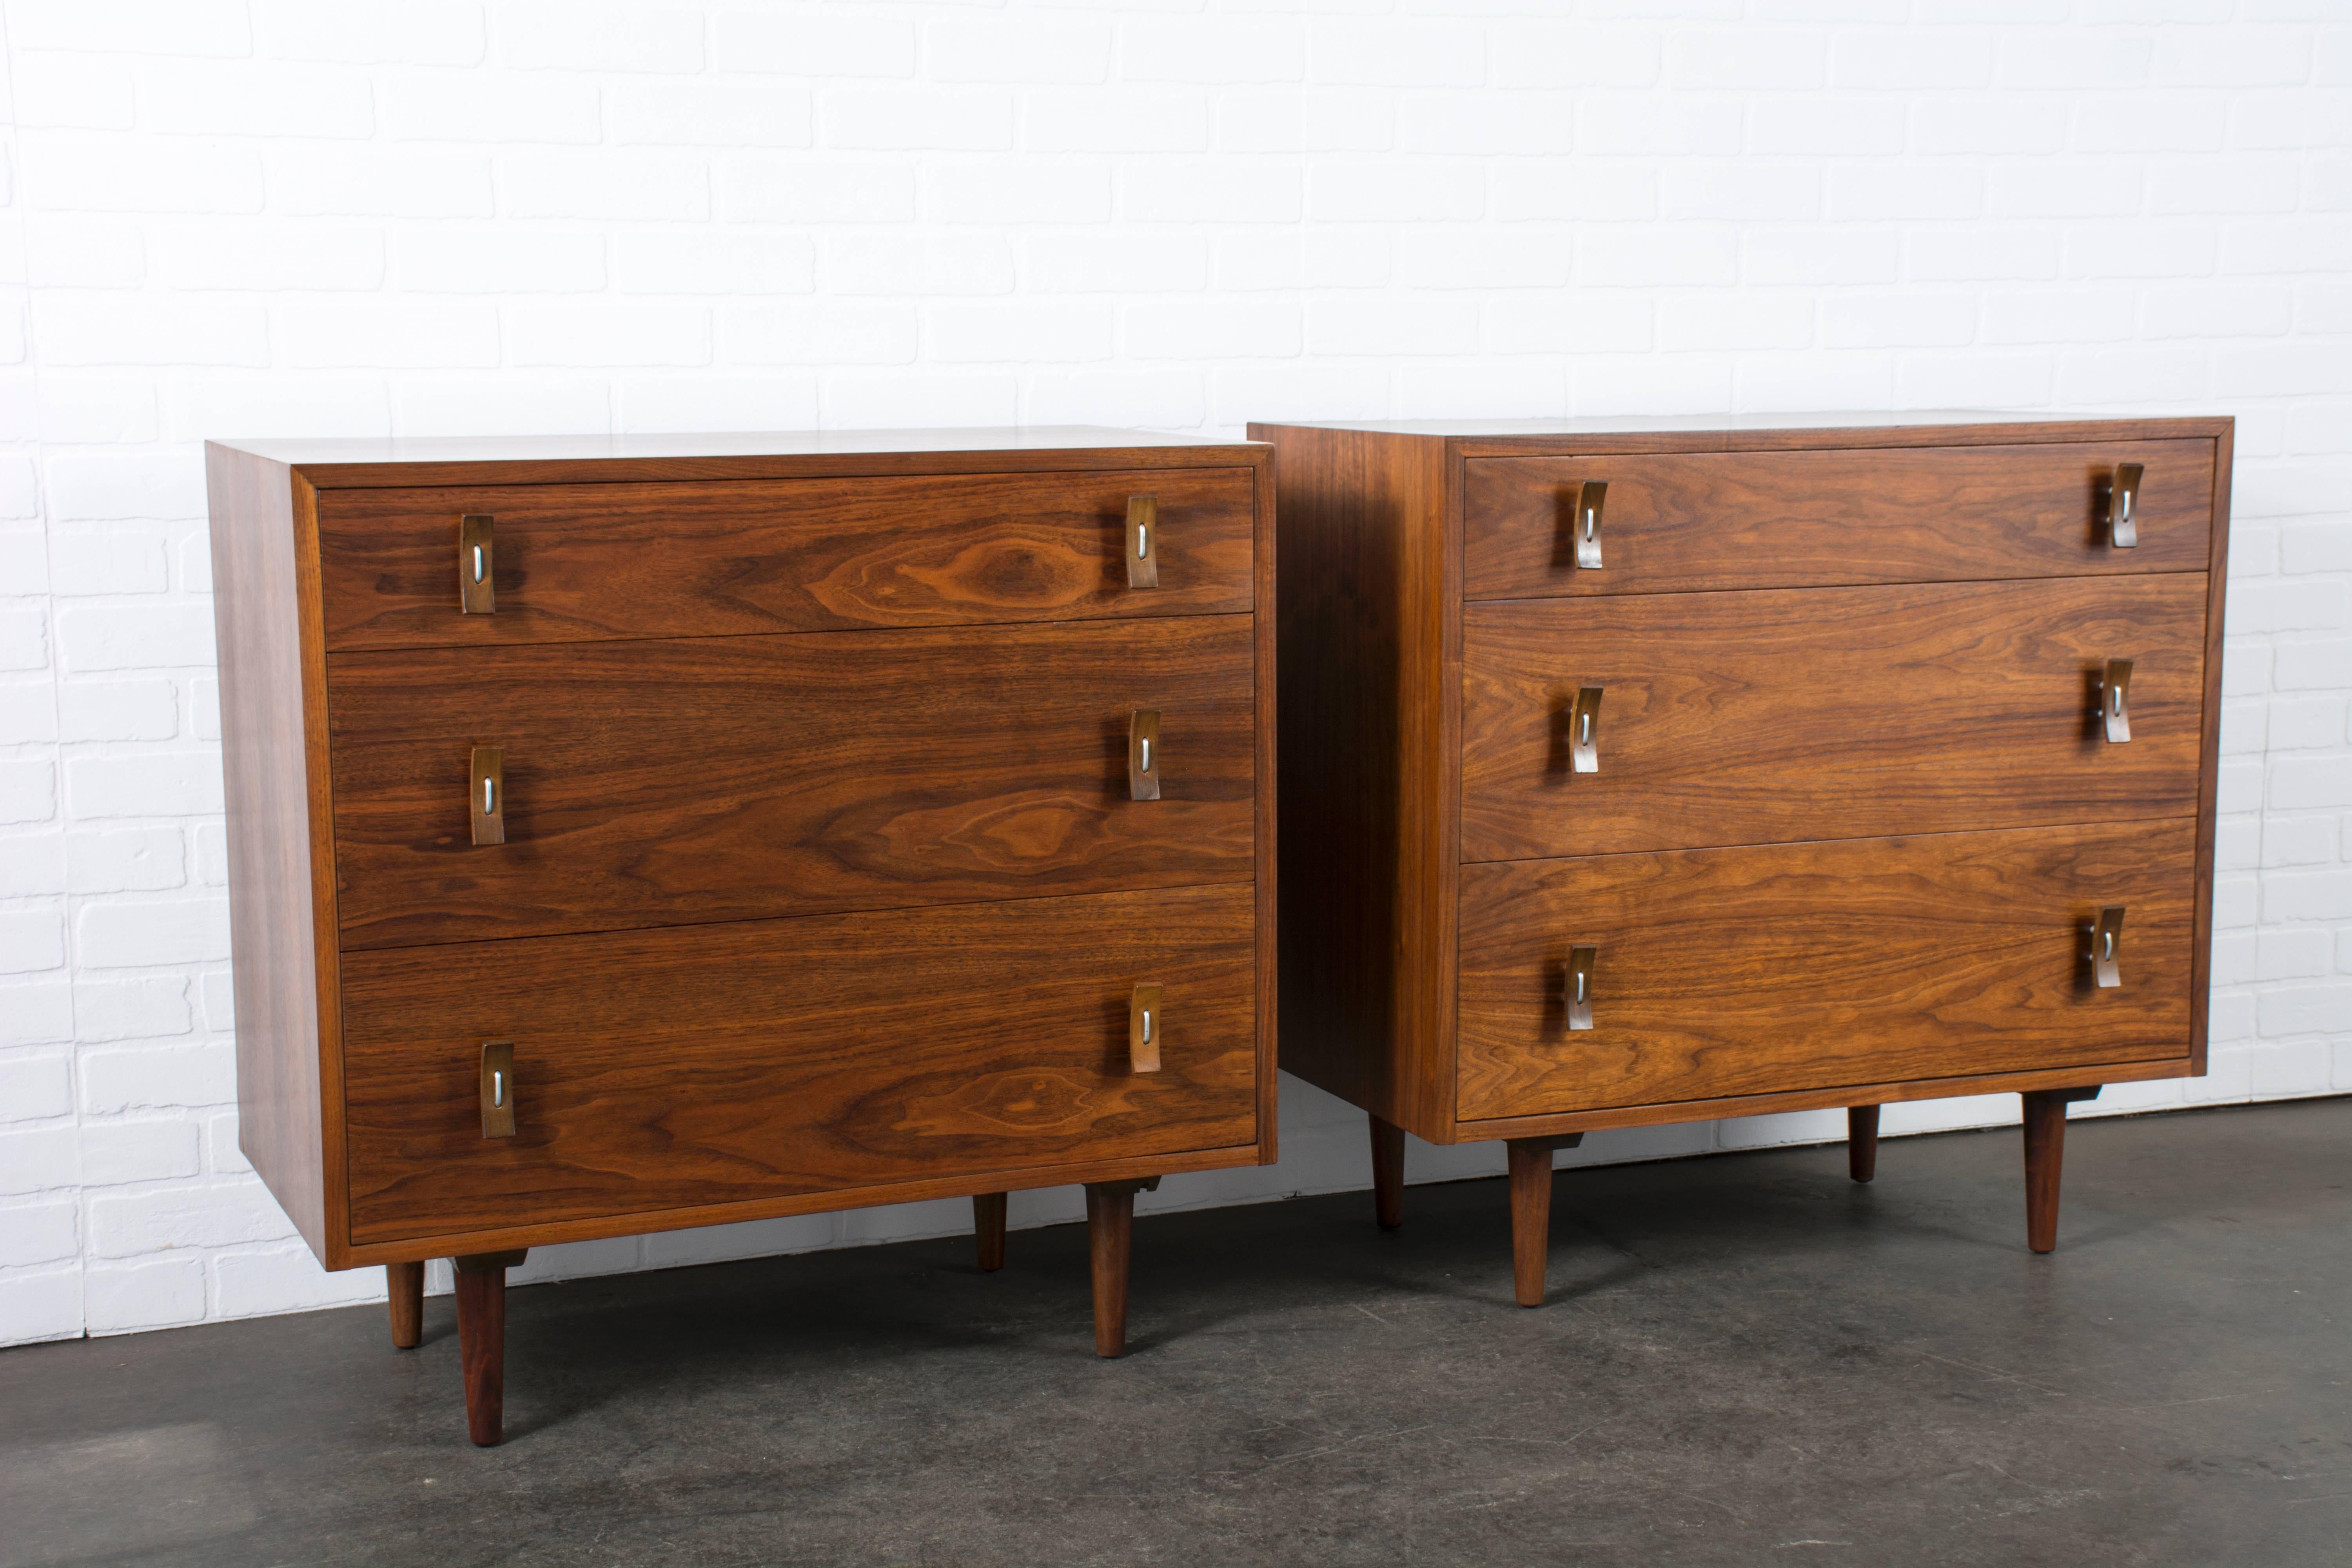 This pair of Mid-Century Modern walnut dressers was designed by Stanley Young for Glenn of California in the 1950s.